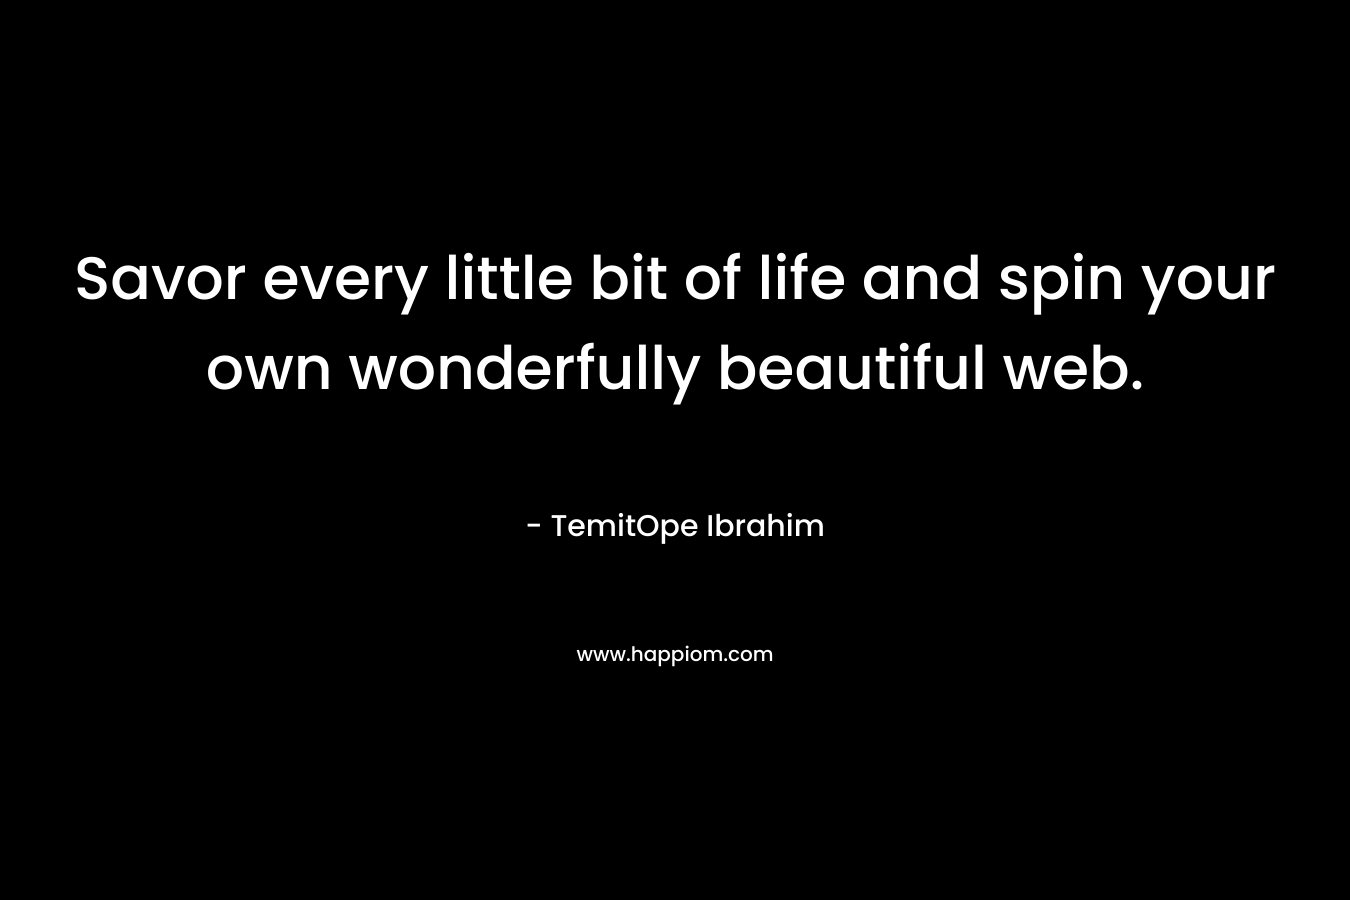 Savor every little bit of life and spin your own wonderfully beautiful web. – TemitOpe Ibrahim